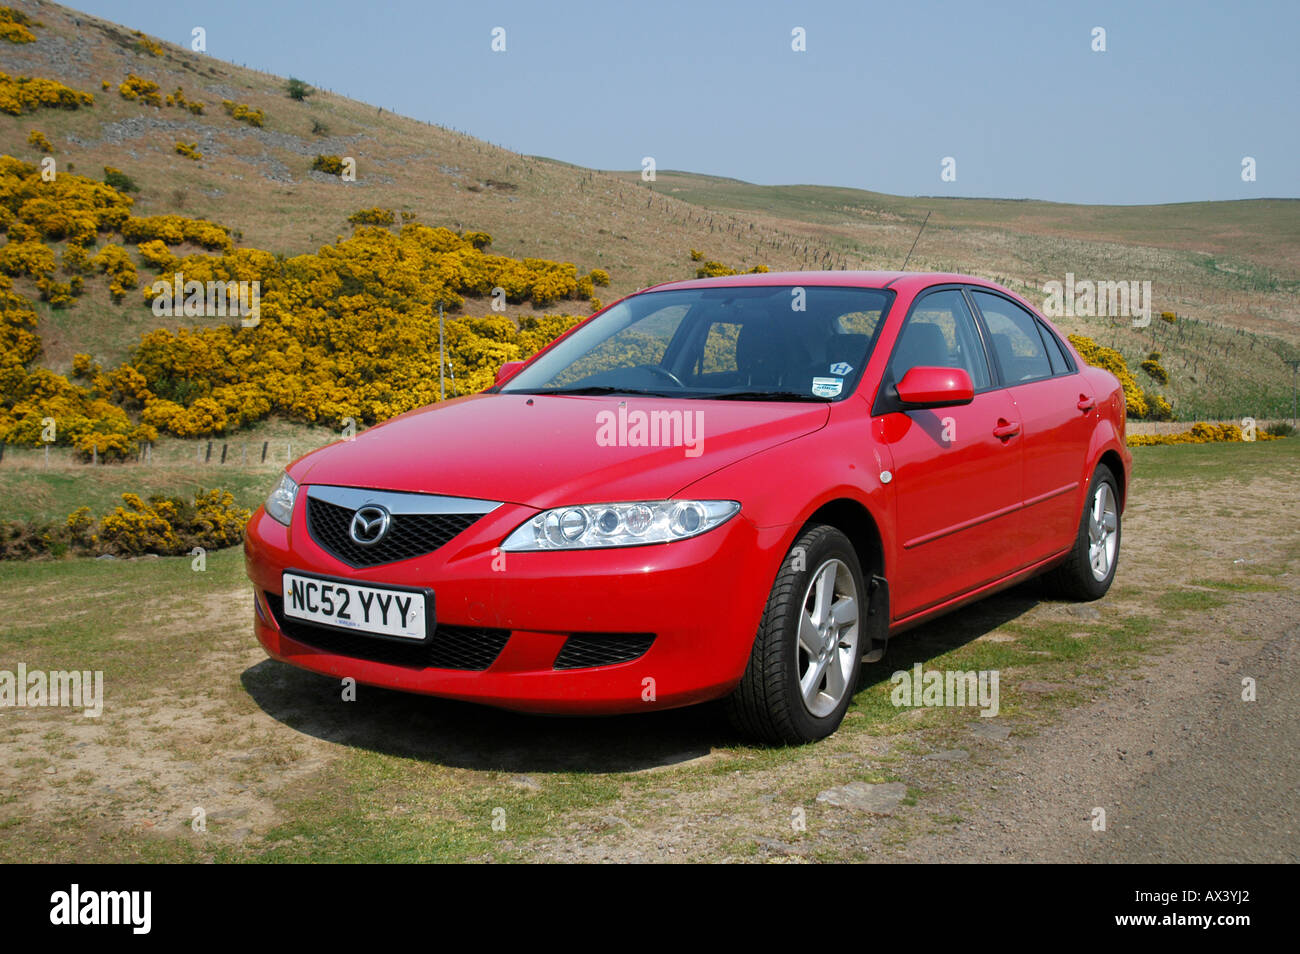 Red Mazda 6 saloon car parked at the side of the road in the countryside in the UK. Stock Photo